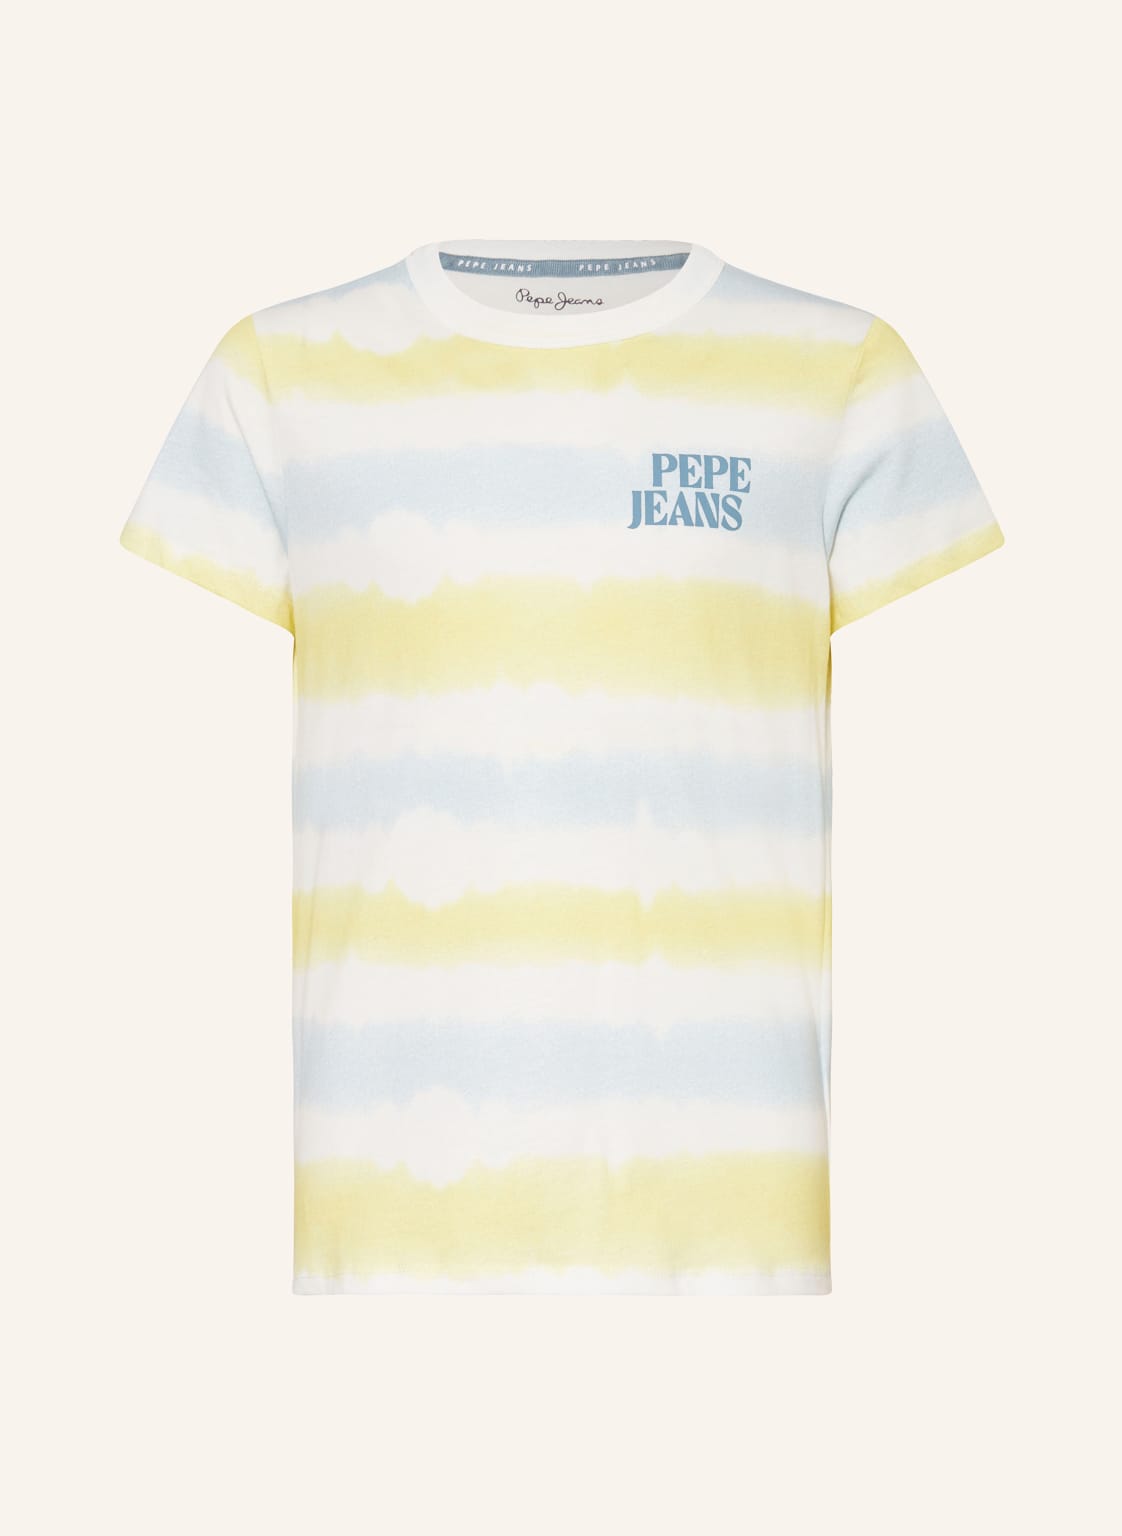 Pepe Jeans T-Shirt gelb von Pepe Jeans